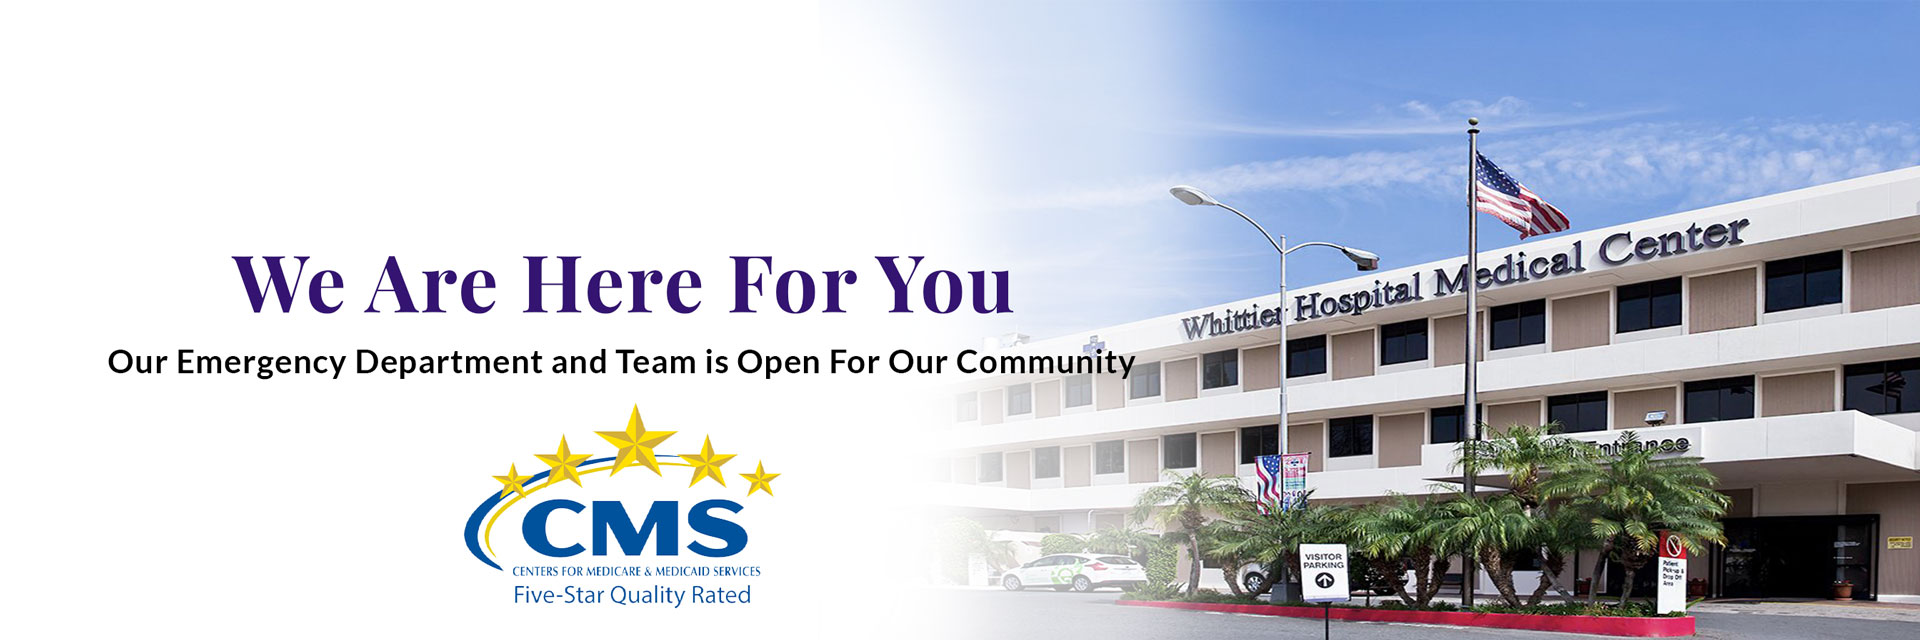 Whittier Hospital Medical Center

We Are Here For You
Our Emergency Department and Team is Open For Our Community 

CMS
CENTERS FOR MEDICARE AND MEDICAID SERVICES